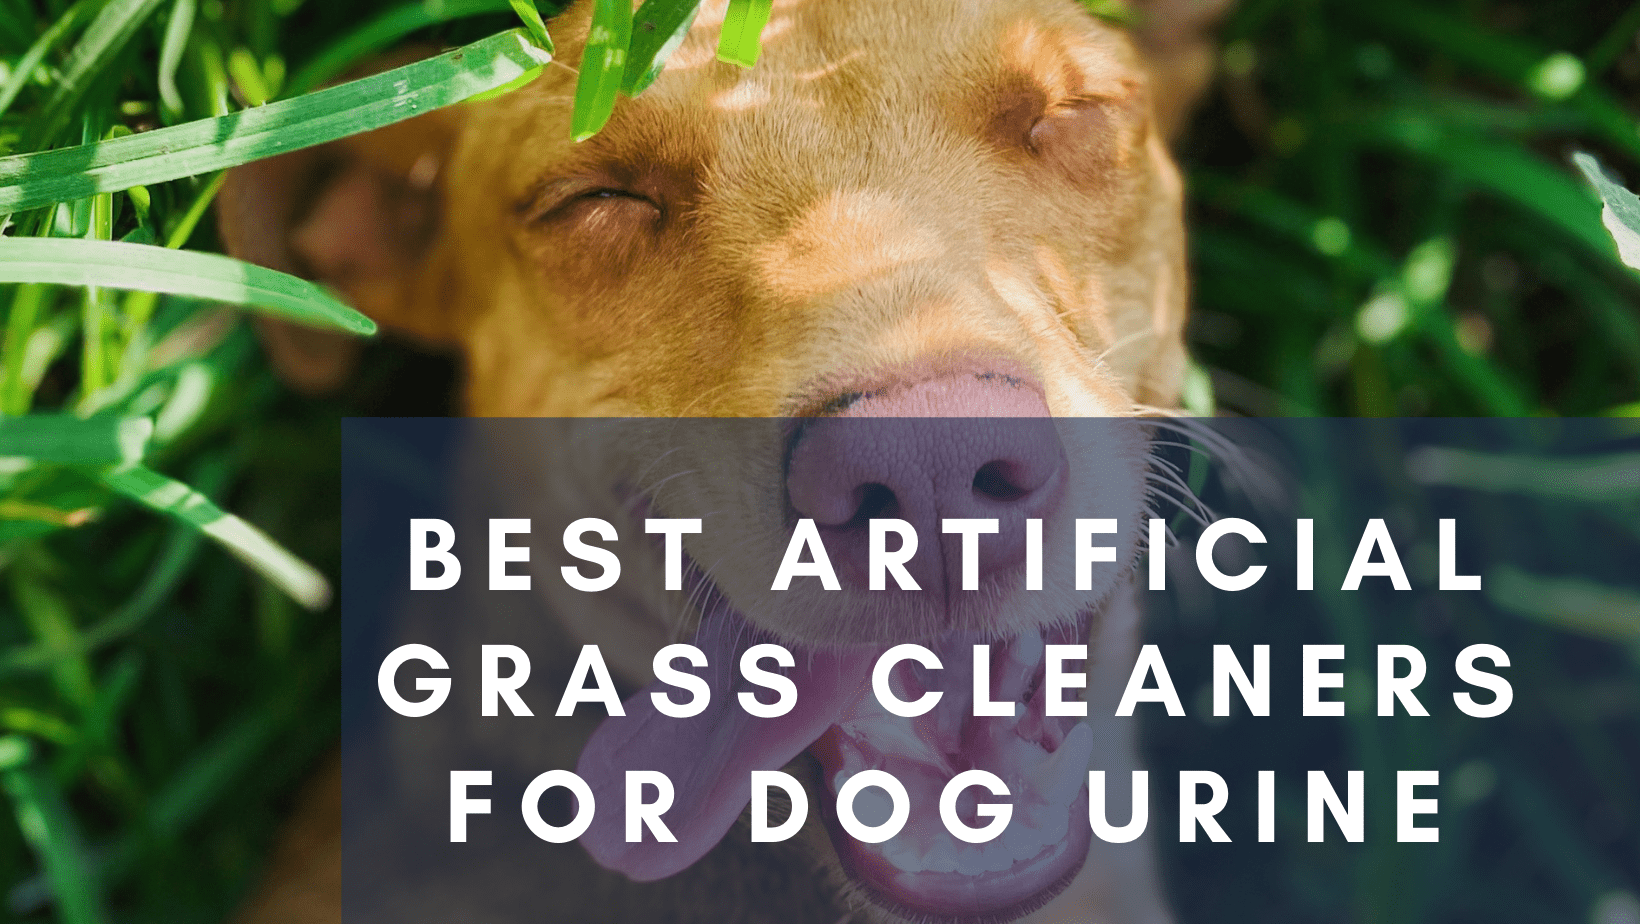 Best Artificial Grass Cleaners for Dog Urine